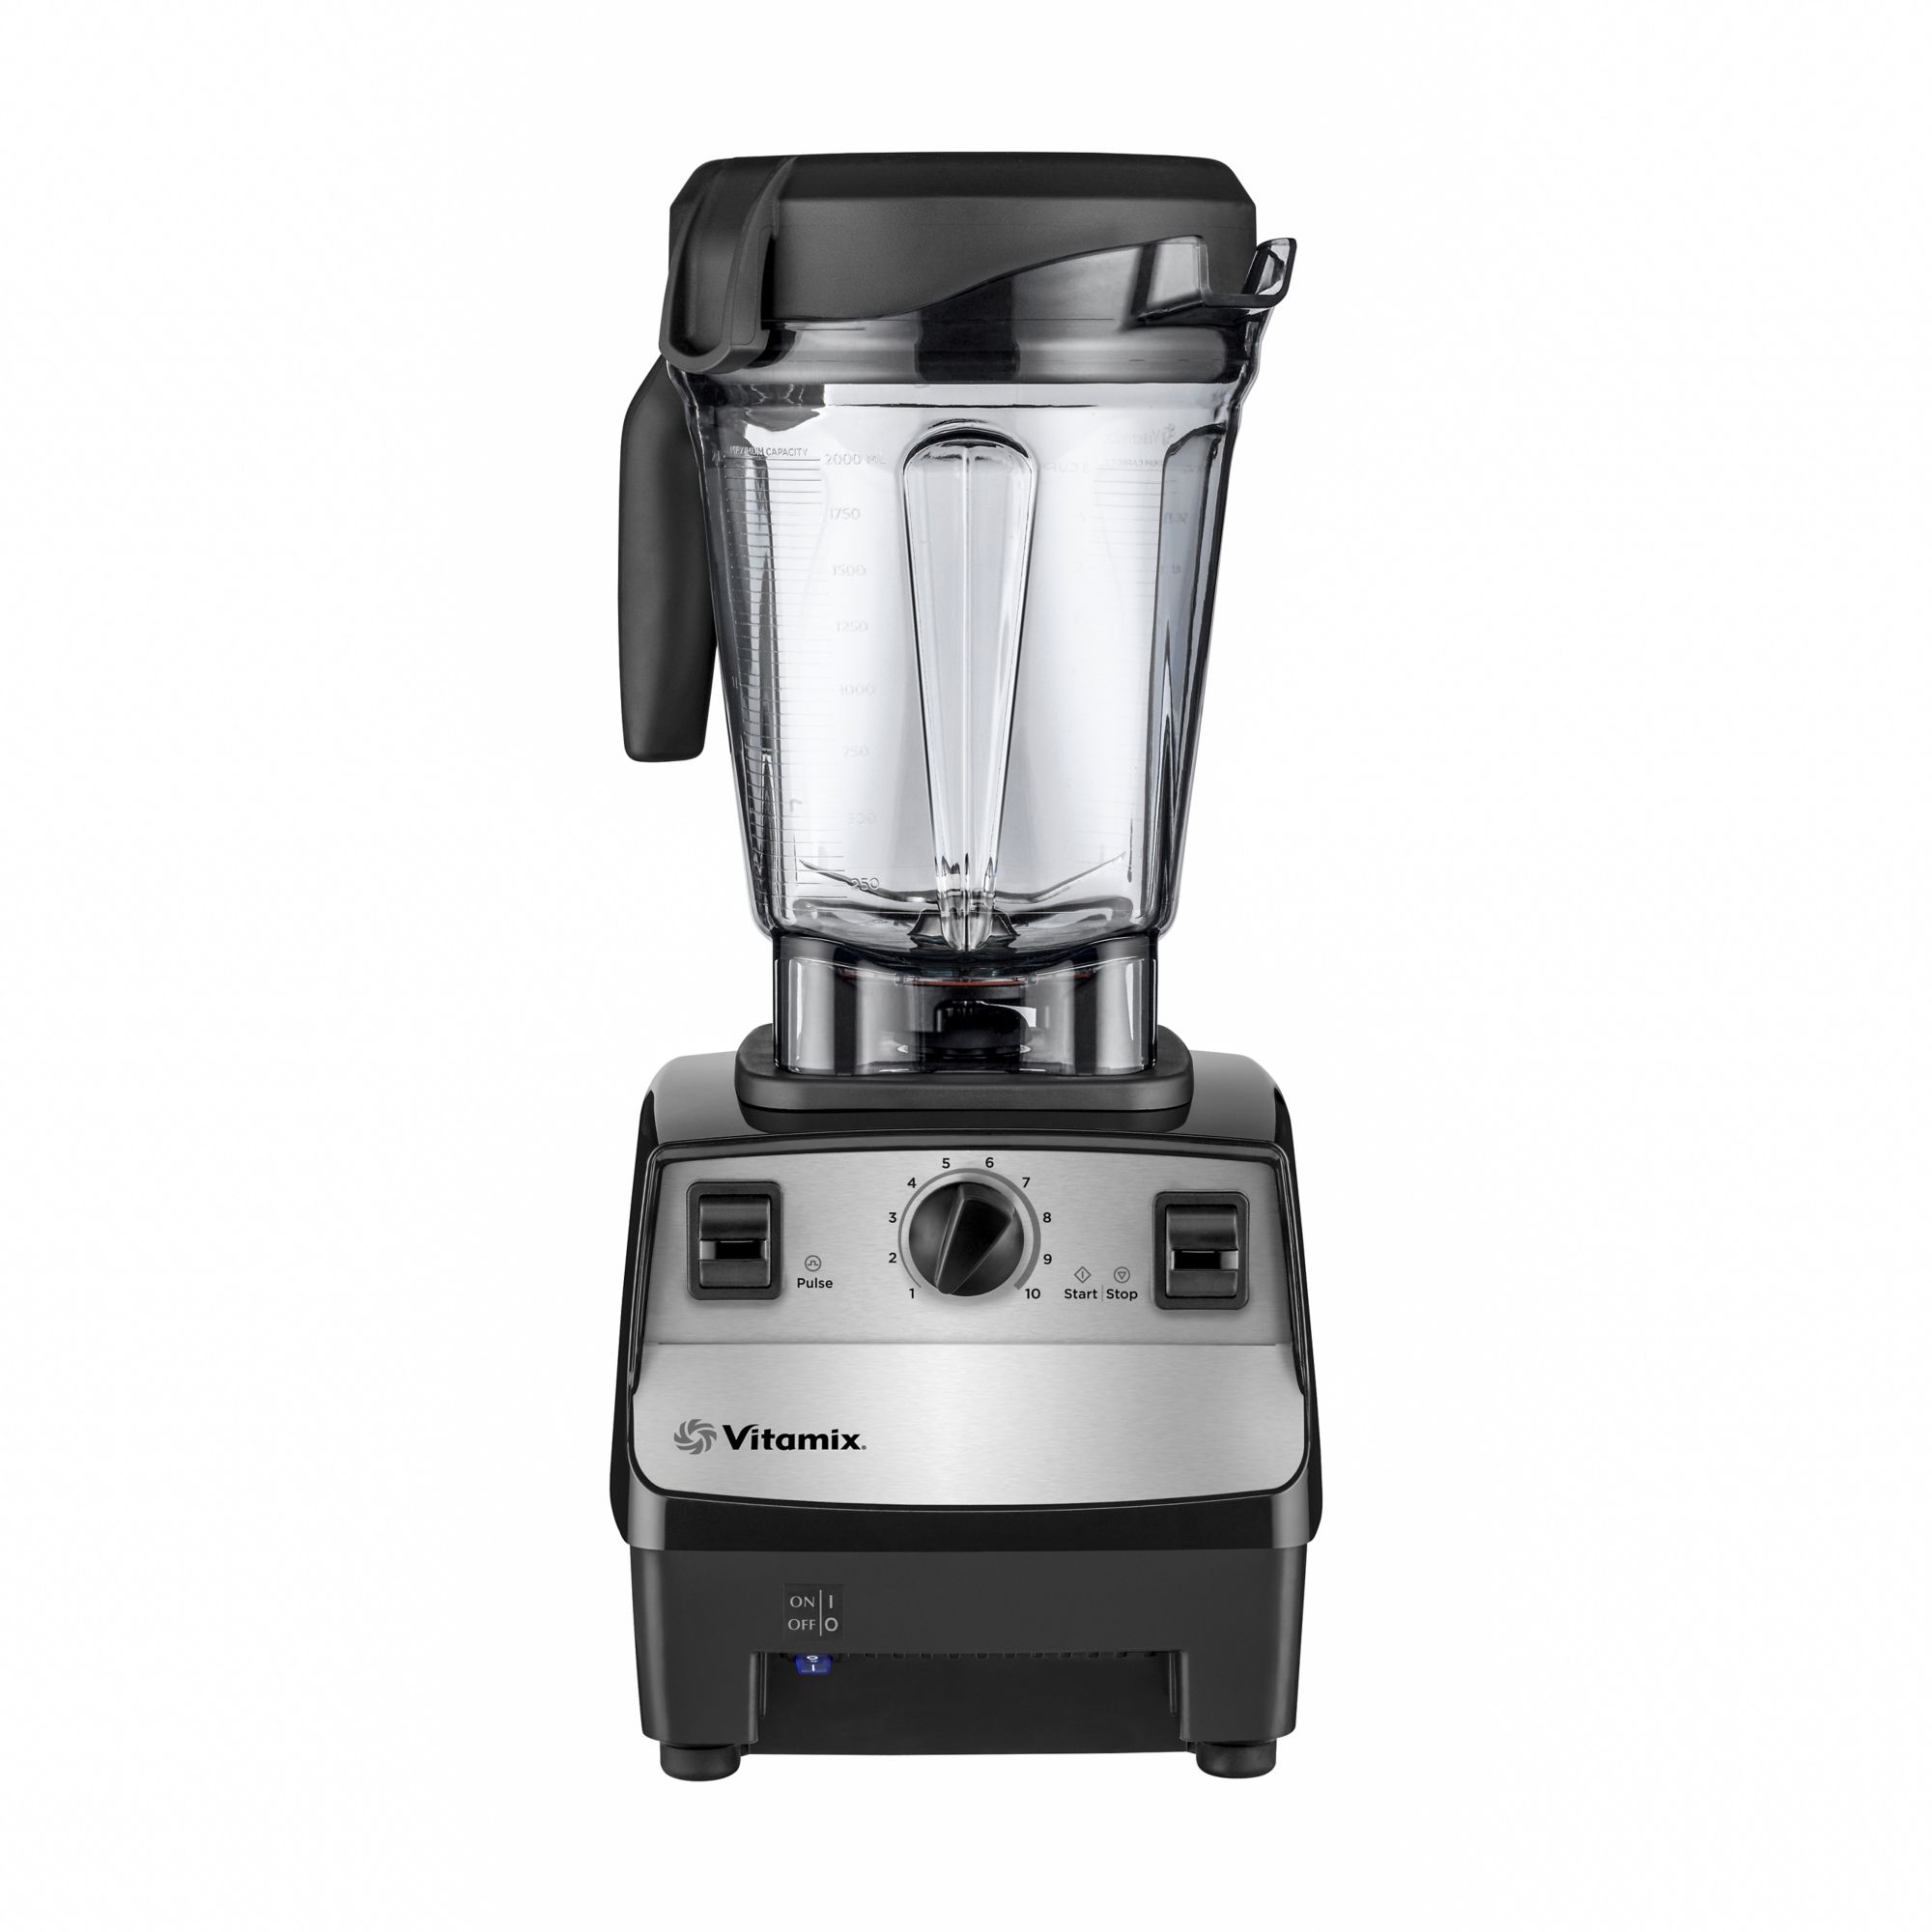 Save $150 on a refurbished Vitamix blender that's practically